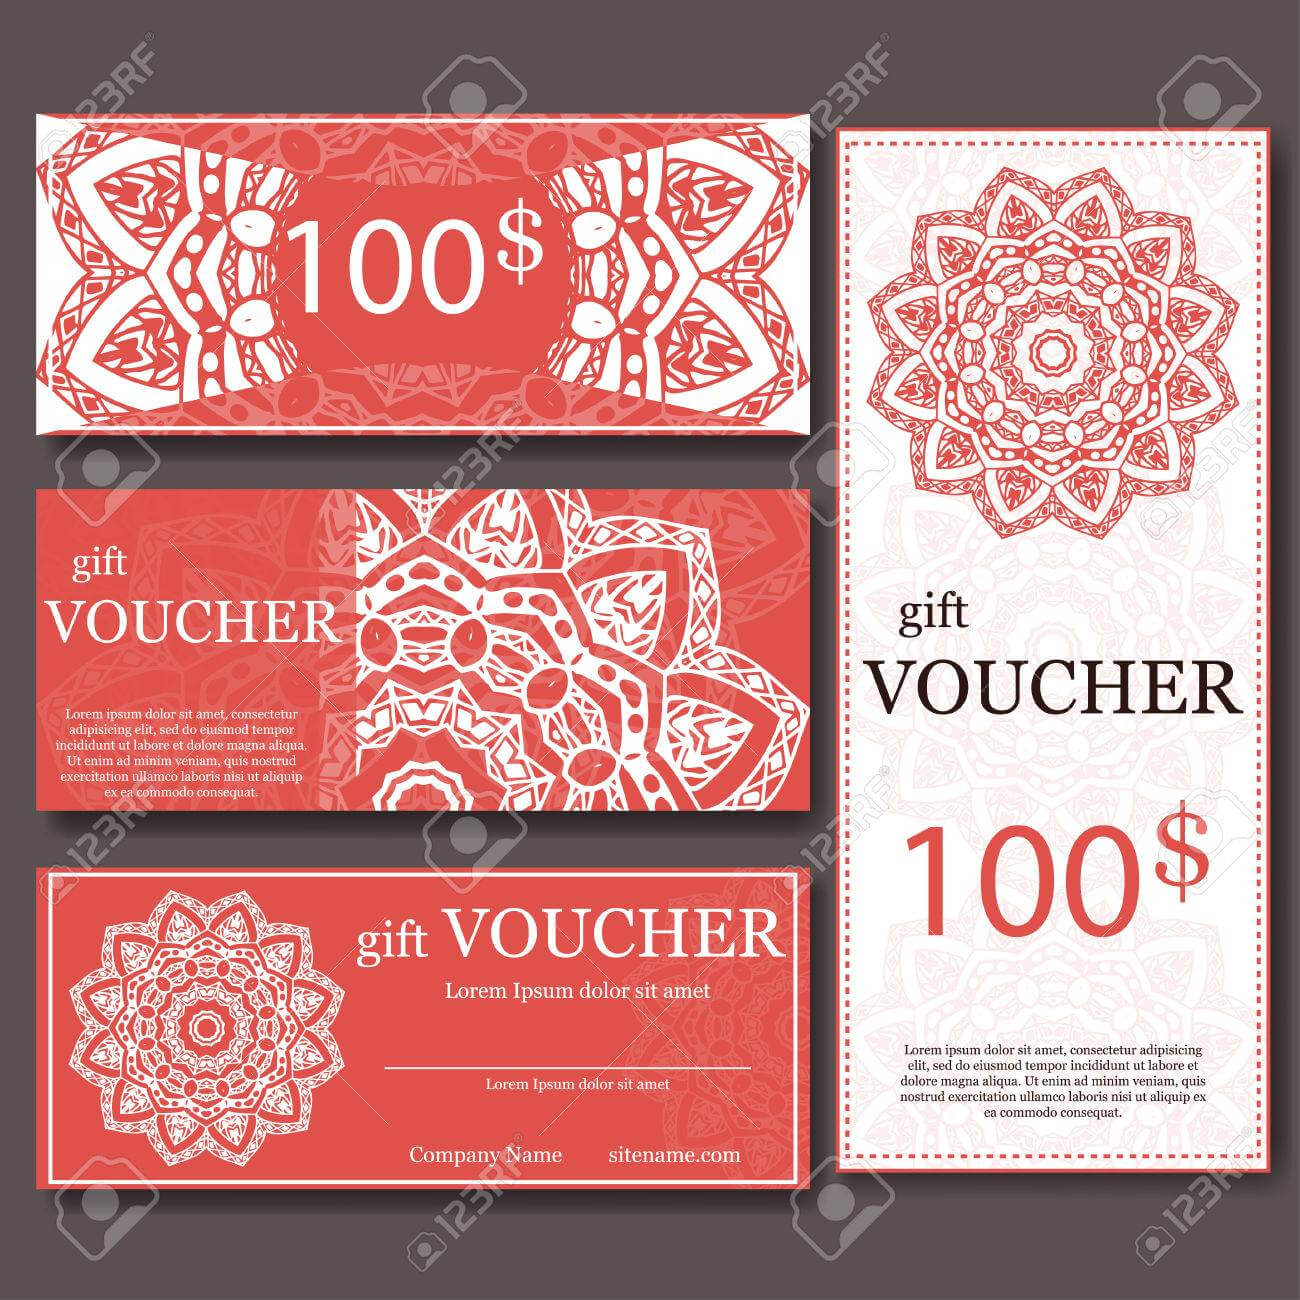 Gift Voucher Template With Mandala. Design Certificate For Sport.. Inside Yoga Gift Certificate Template Free